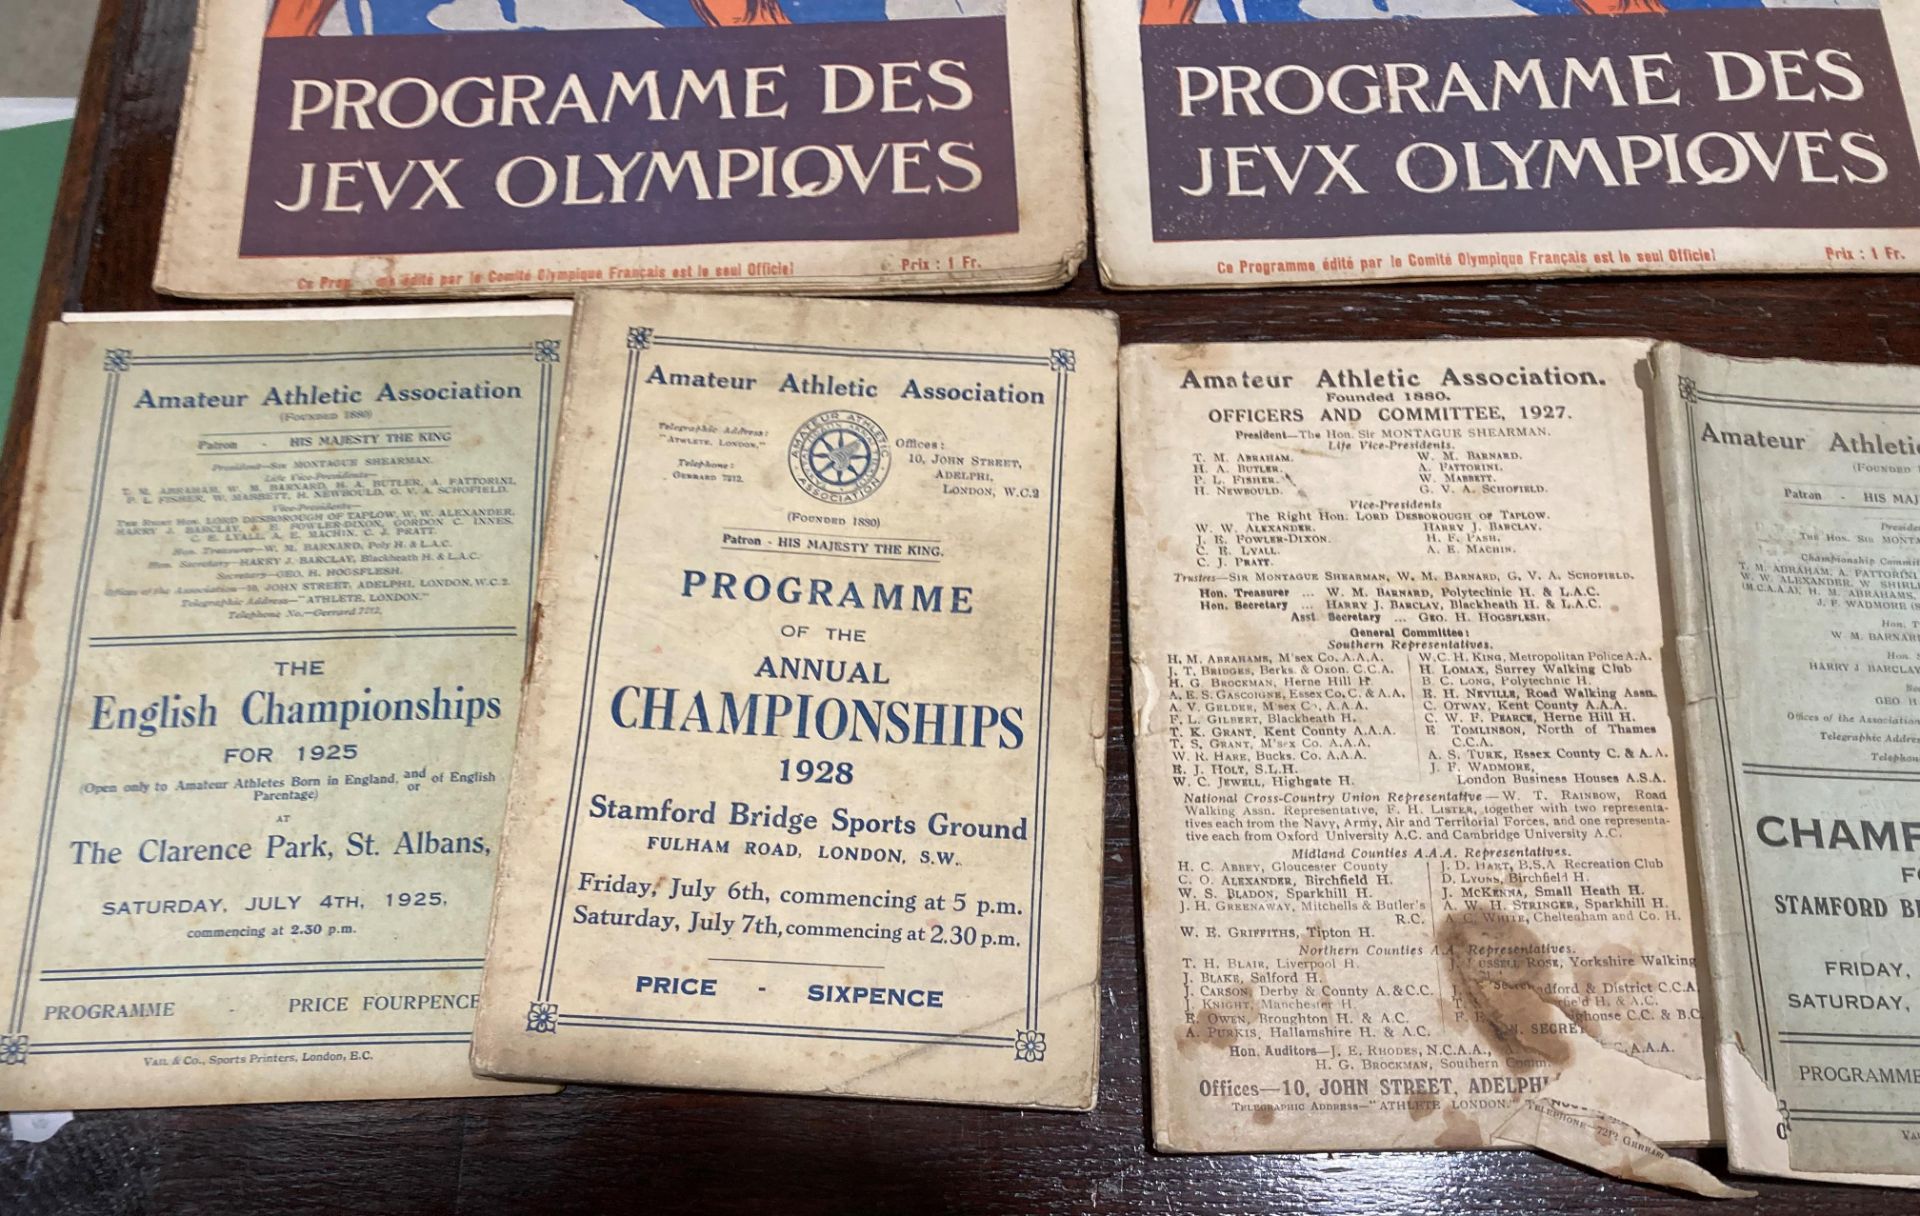 Two programmes for the VIII Olympide Paris 1924, - Image 3 of 4